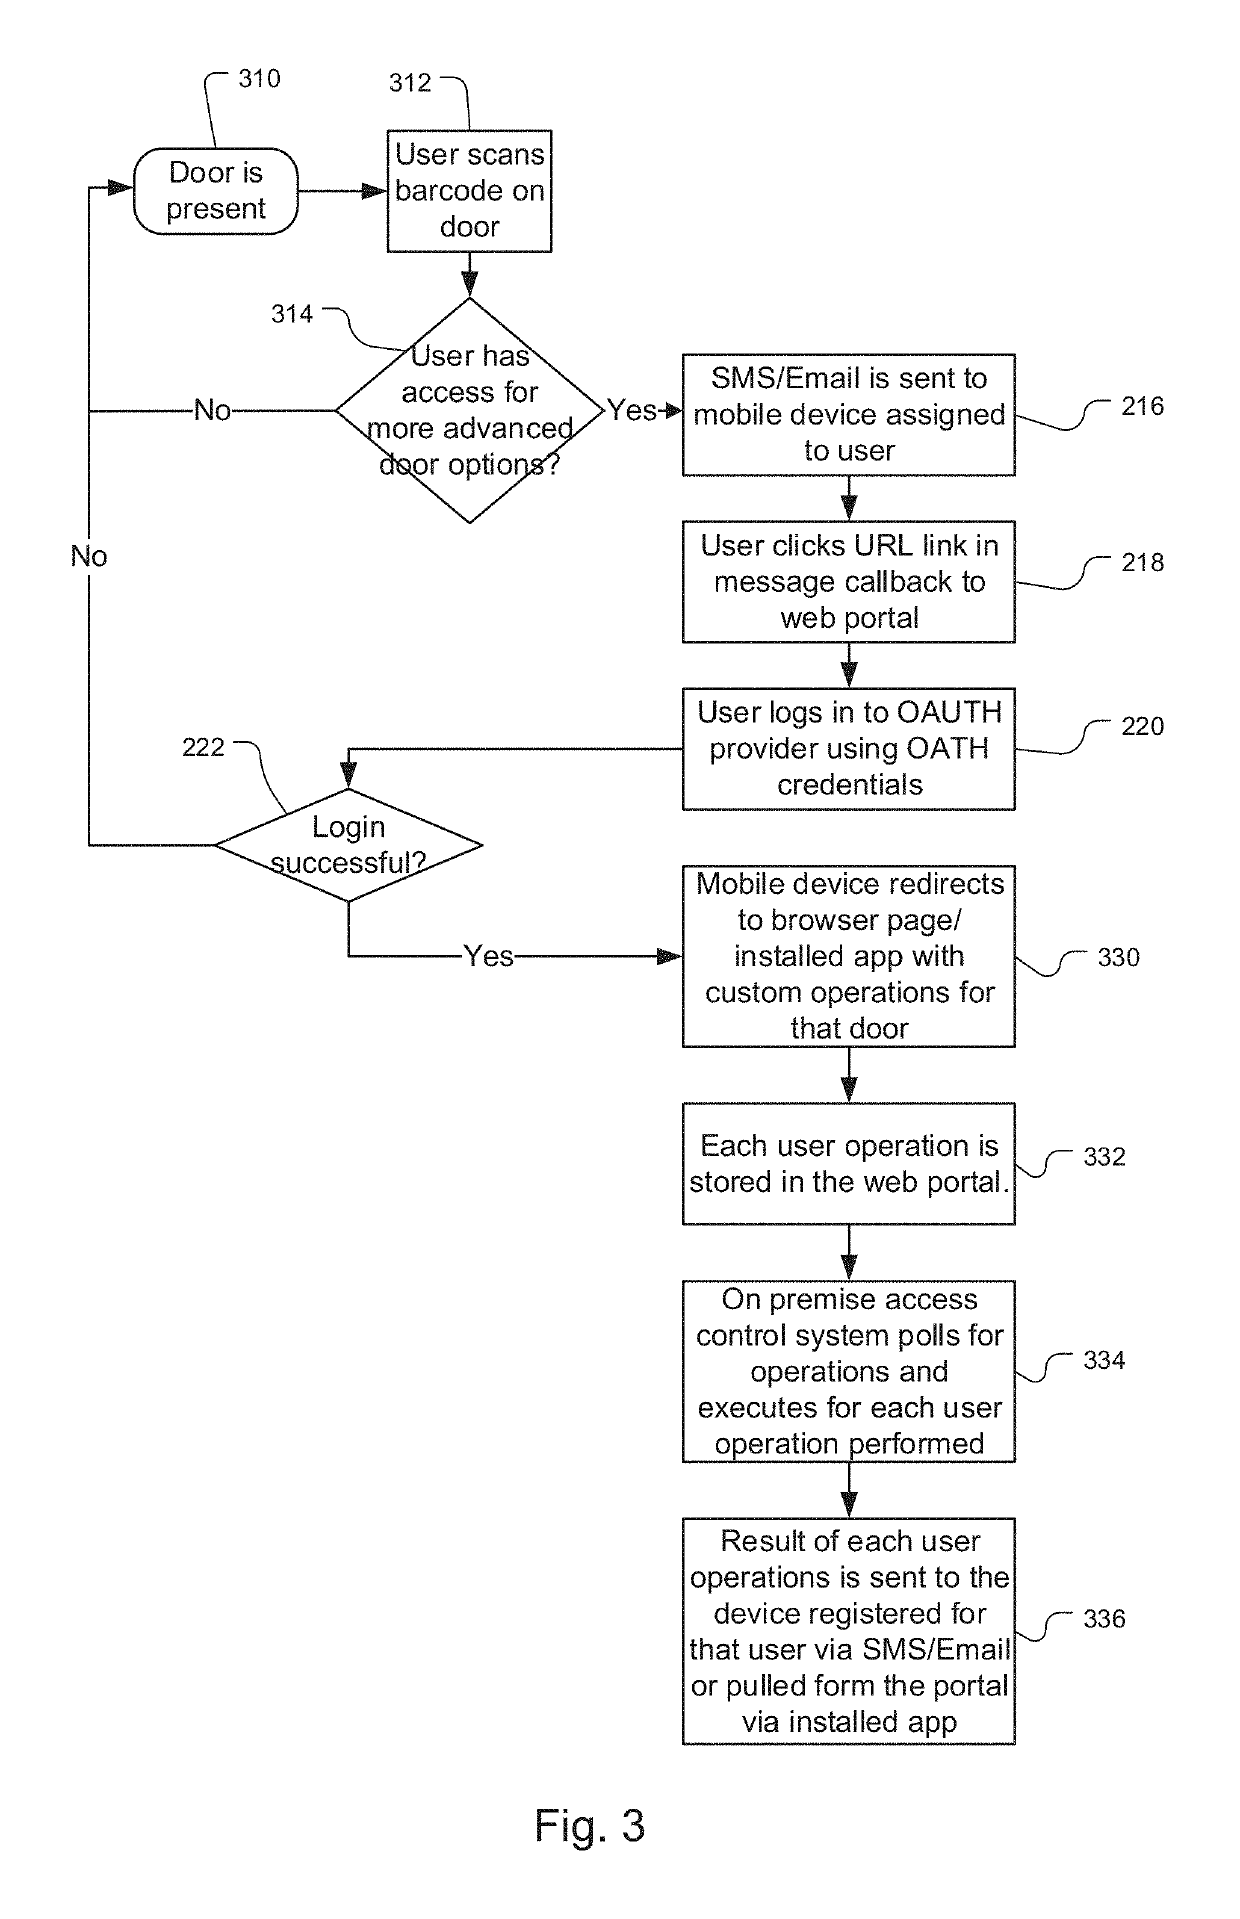 Access and automation control systems with mobile computing device